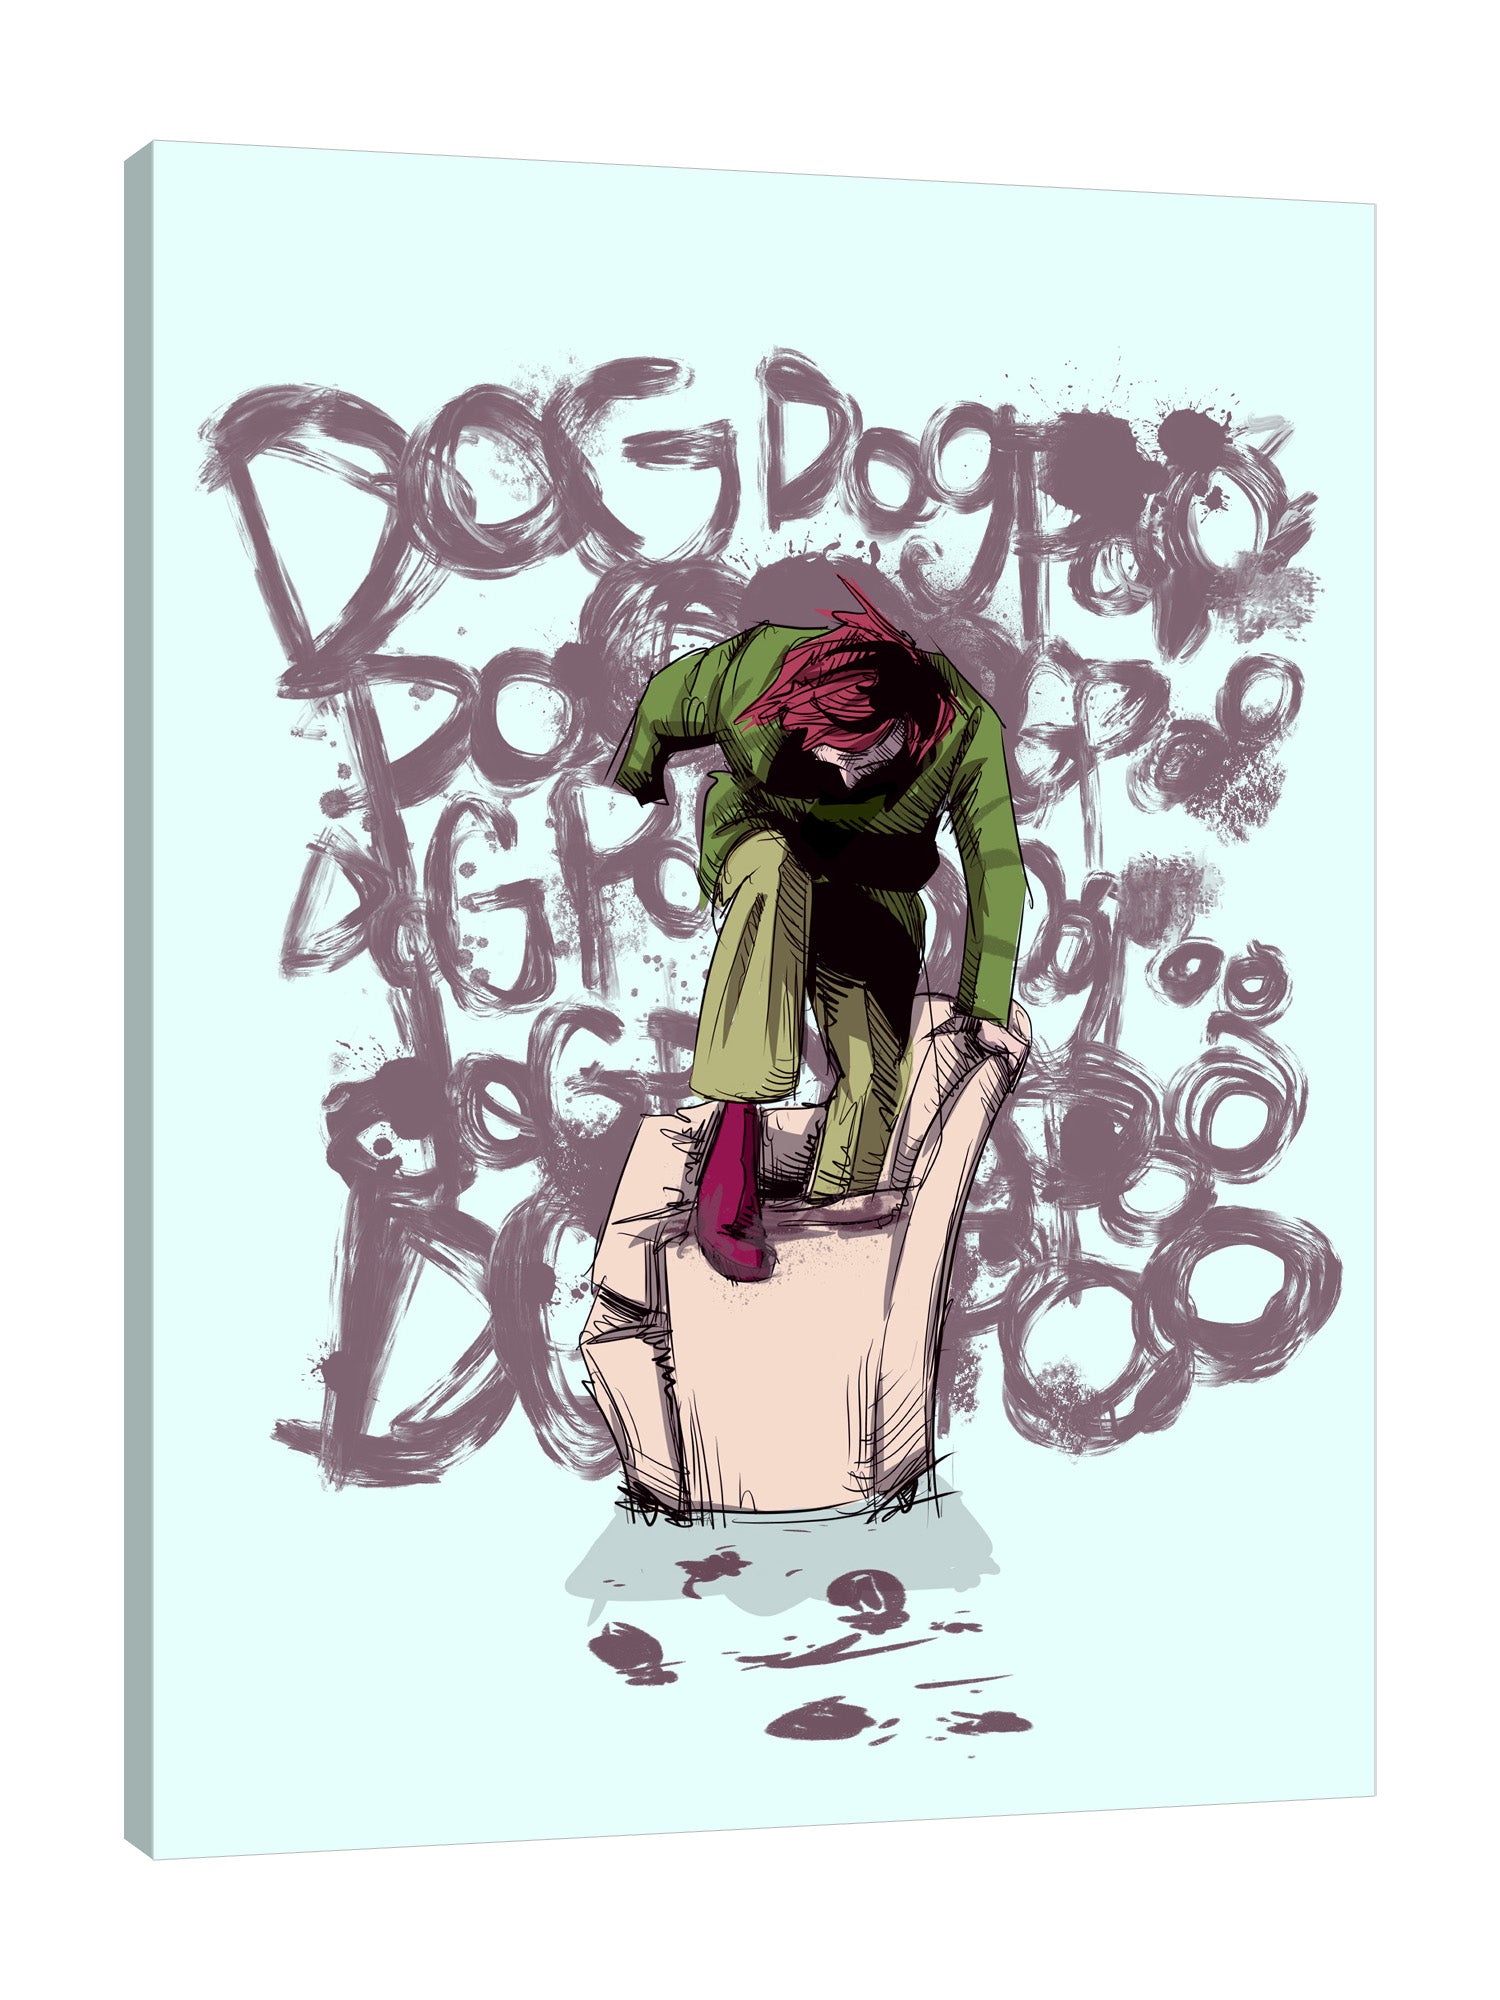 Ludwig-Van-Bacon,Vertical,3X4,Modern & Contemporary,People,man,guy,dog poo,dog poos,poos,poo,words,scribble,scribbles,brown,Lavender Purple,Purple,Mist Gray,Gray,Charcoal Gray,Blue,White